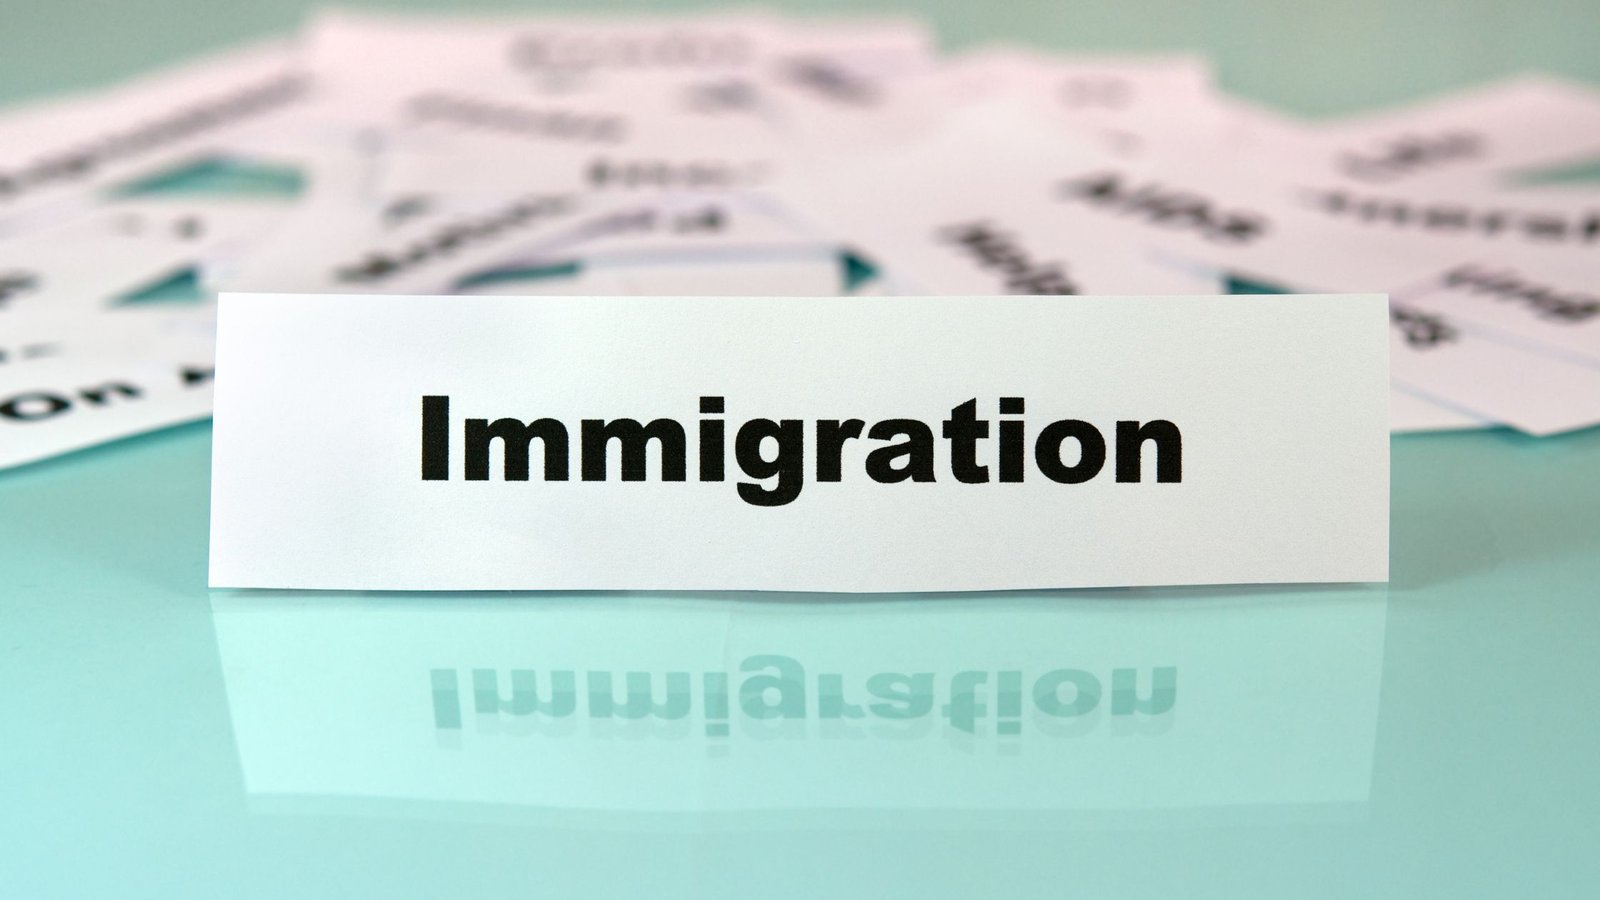 Expert Immigration Legal Services by Neda Zaman in Encino, California